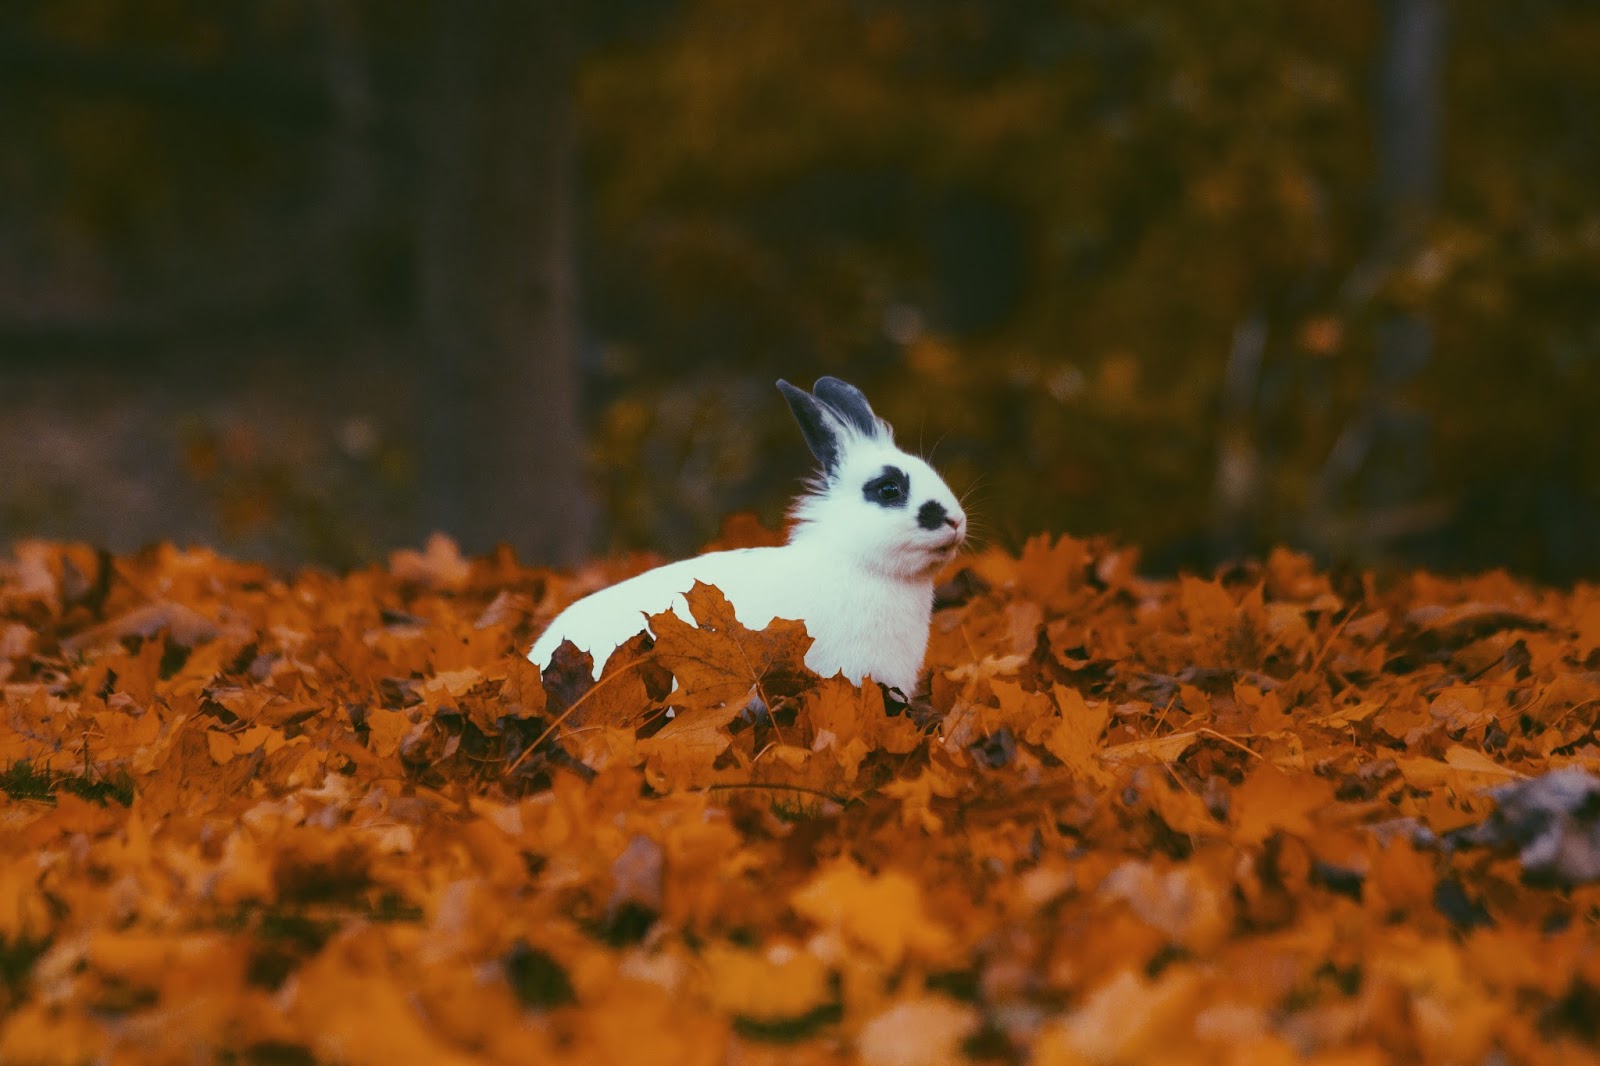 White Rabbit Sitting in Autumn Leaves Photography